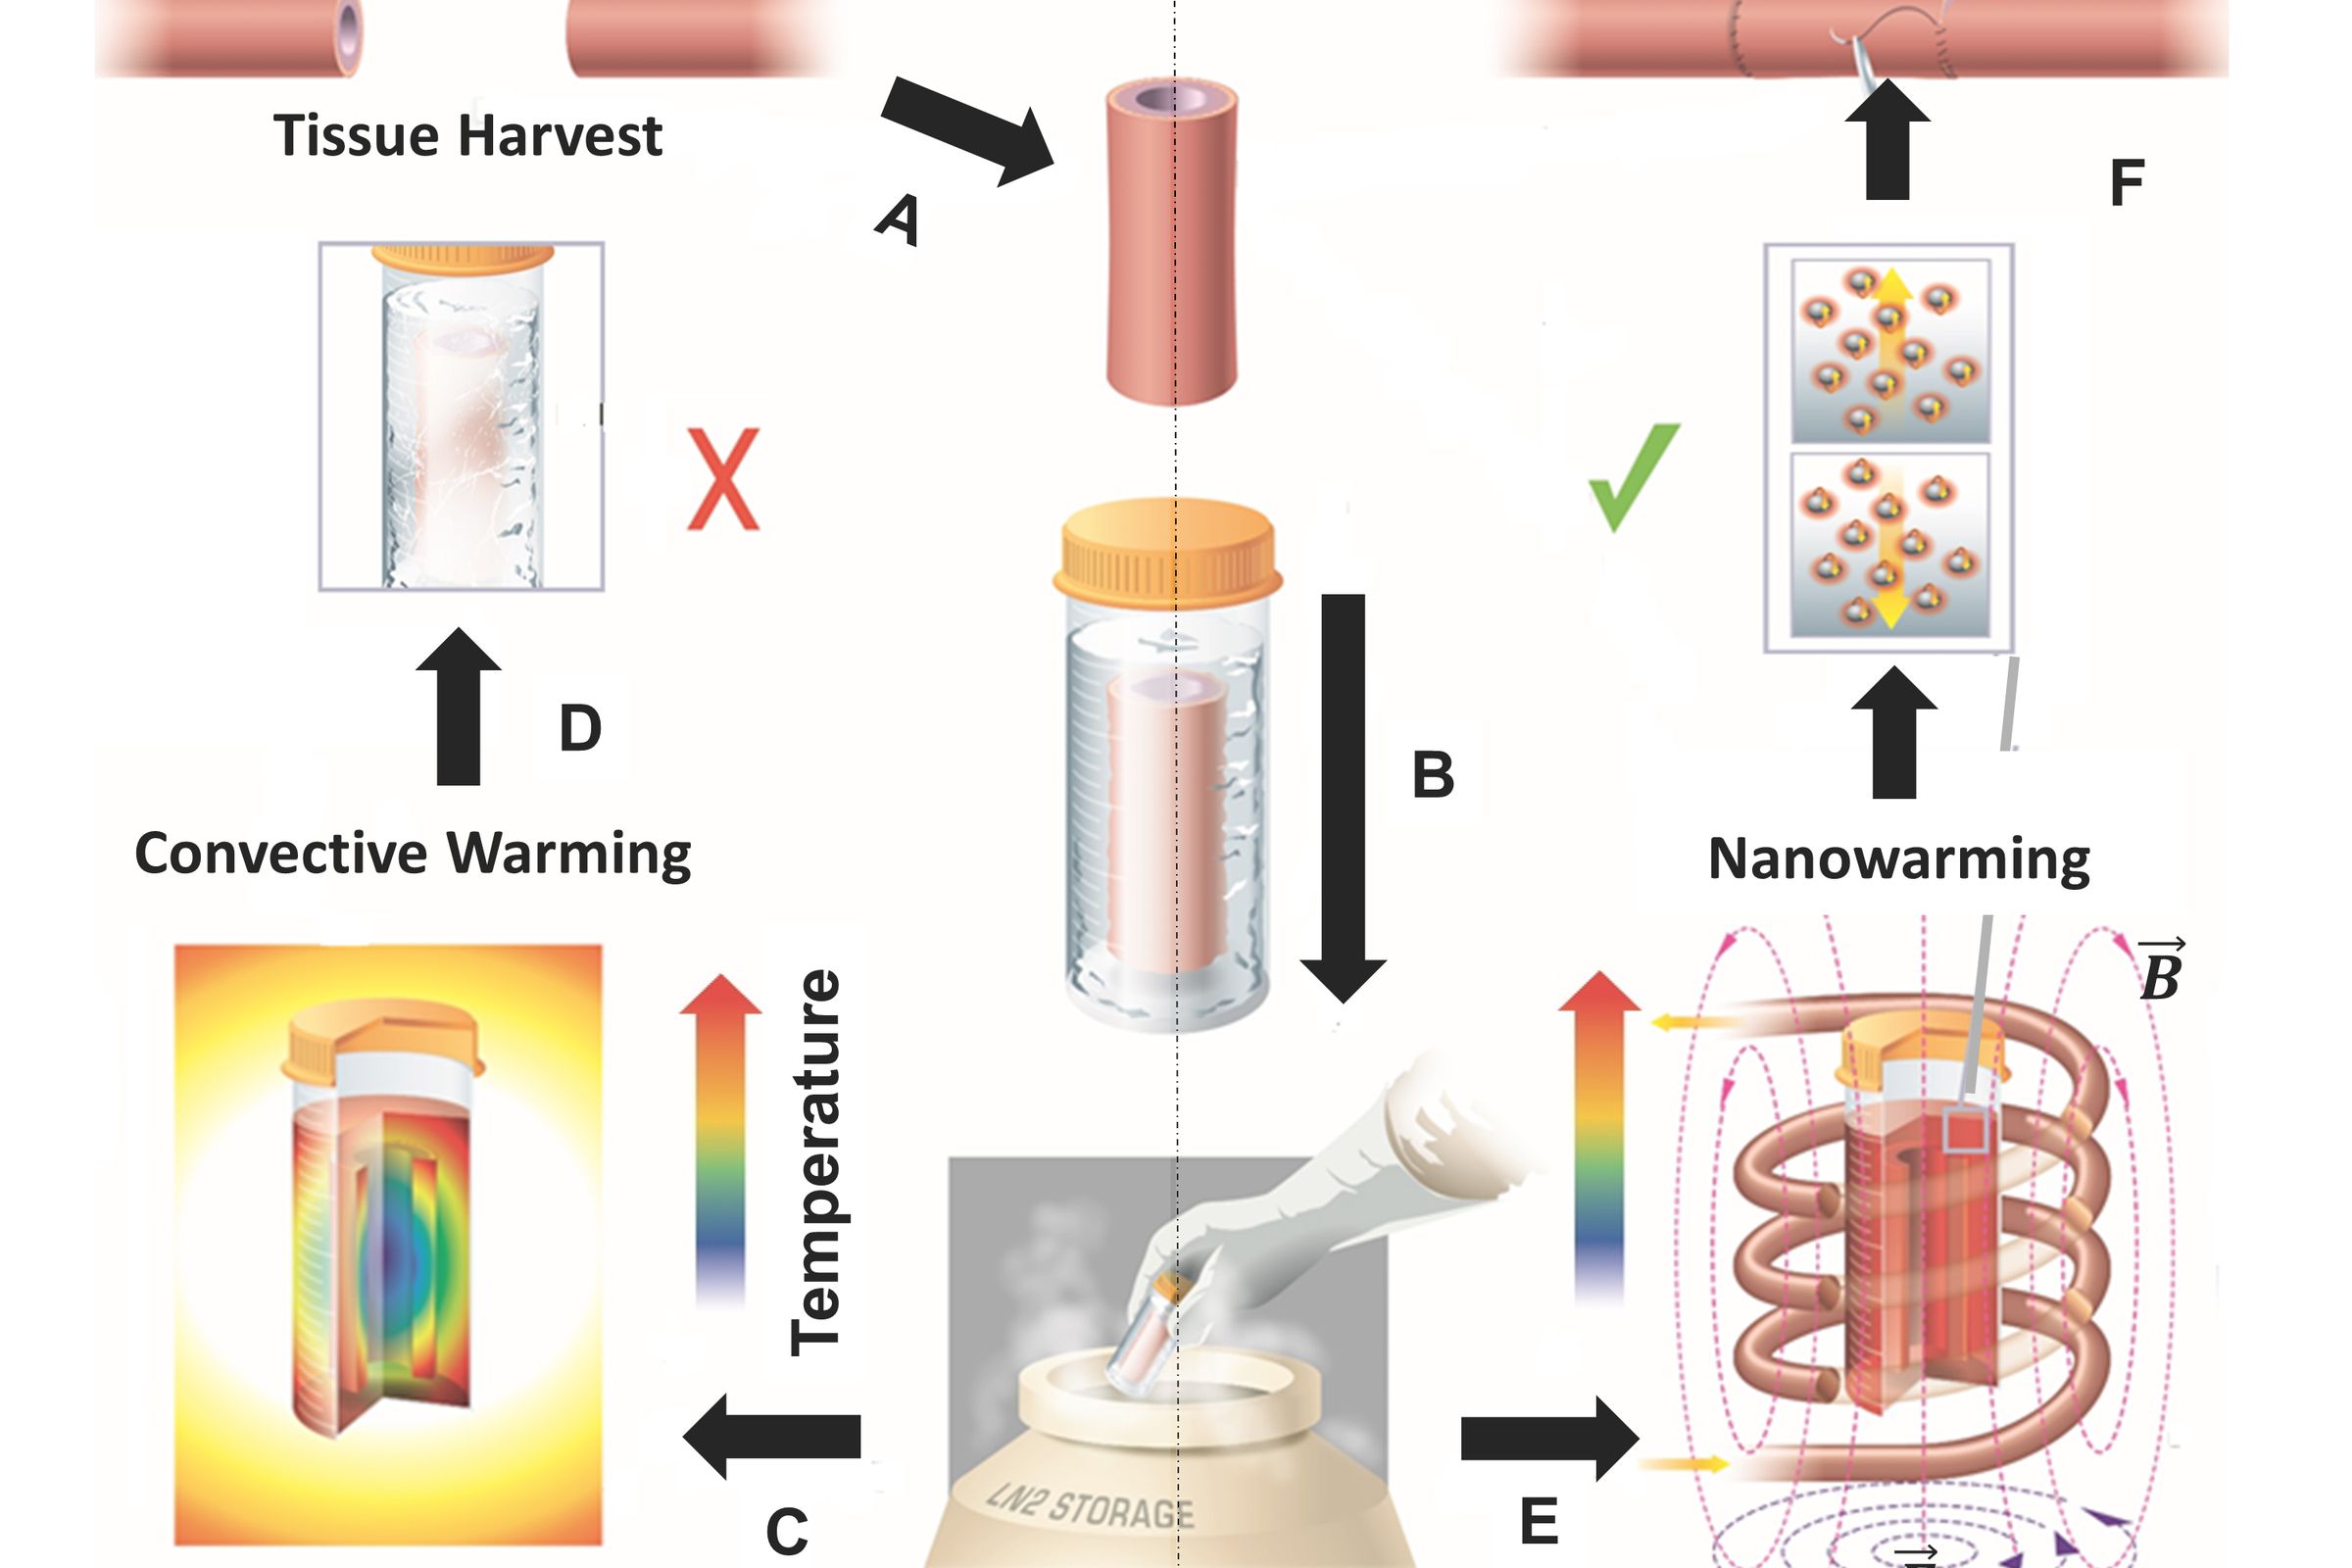 Unlike convective warming, the new nanowarming method prevents tissue damage by evenly reheating cryogenically preserved tissues.